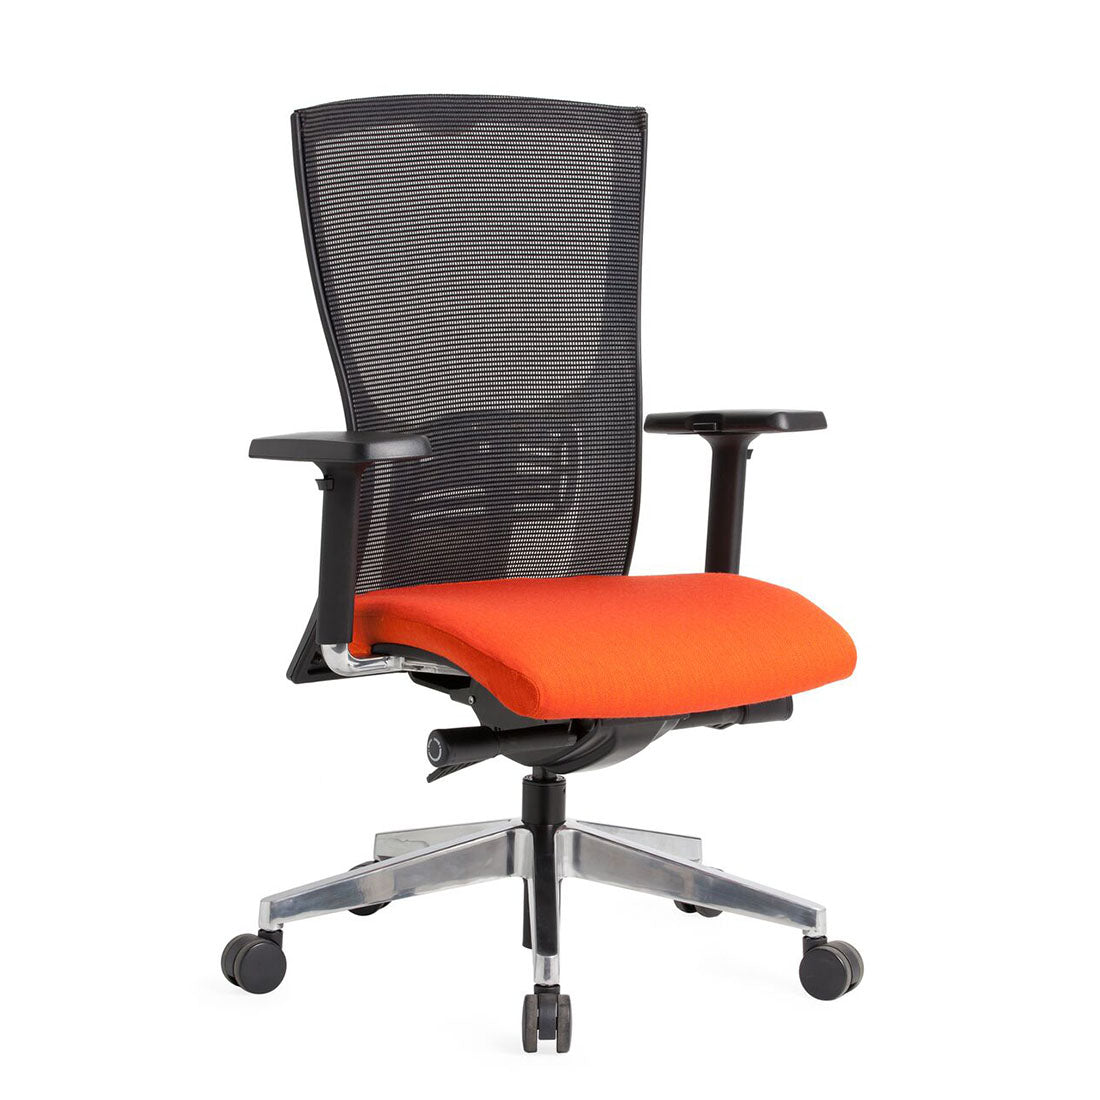 Domino Executive Chair - switchoffice.com.au